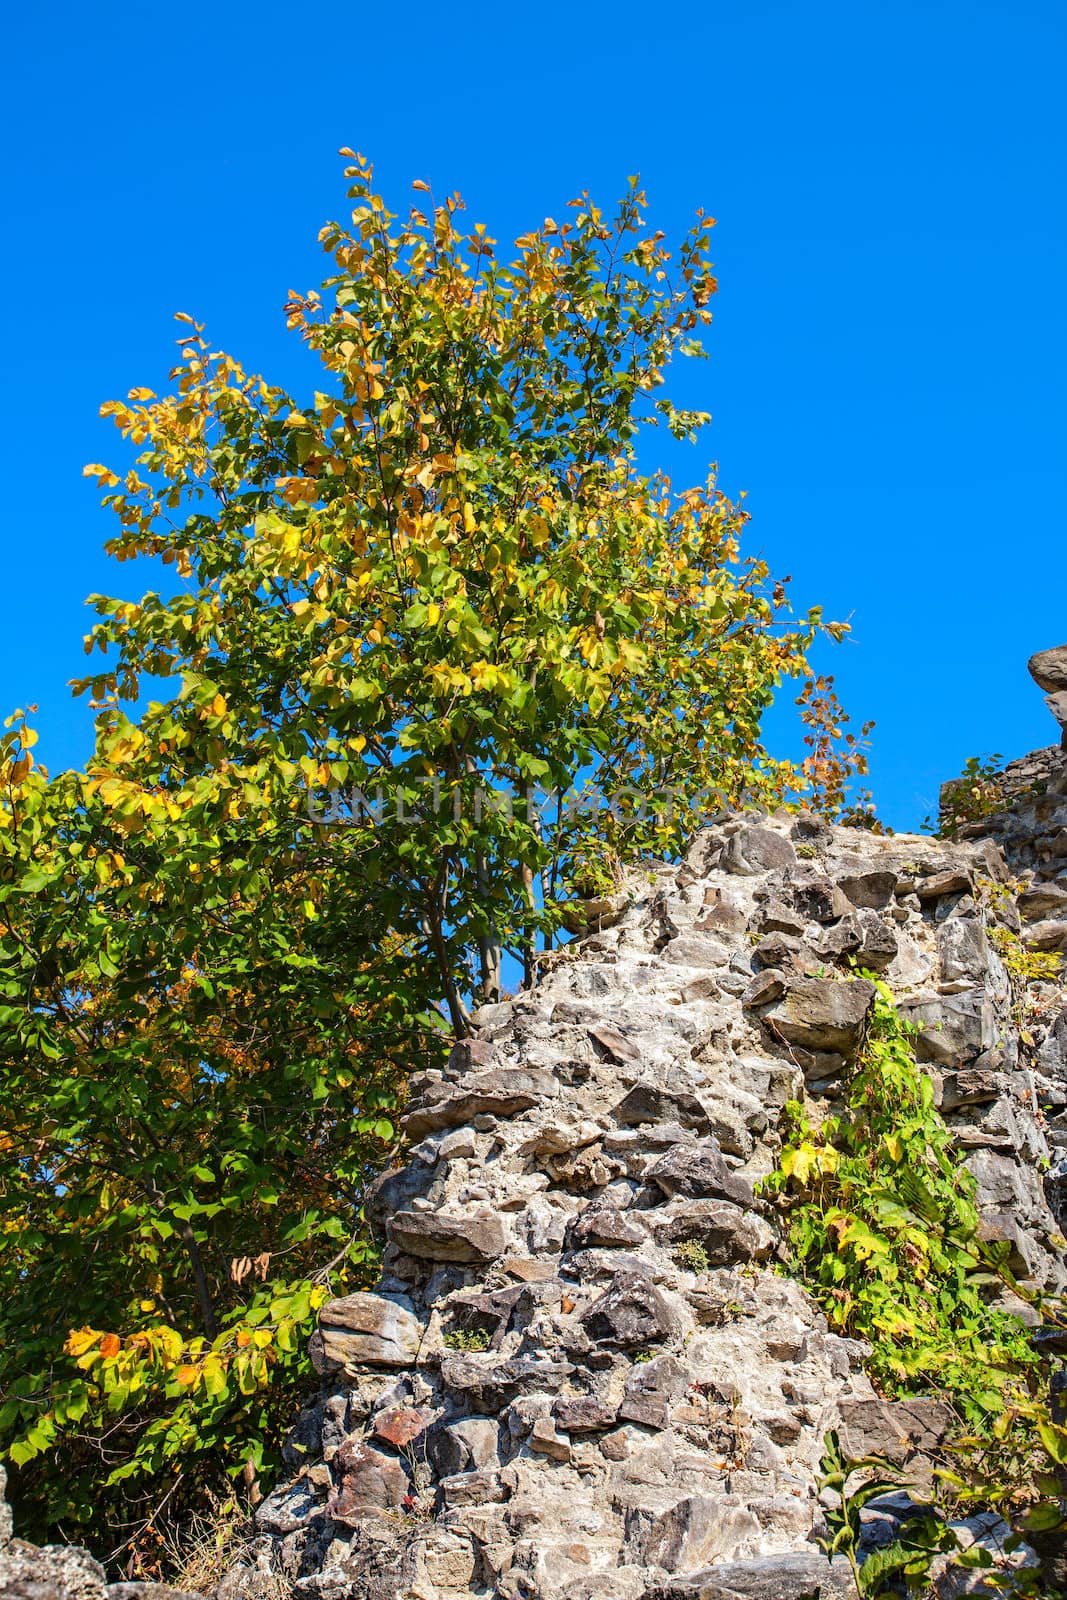 Nevitsky Castle. The wall of an old castle in early autumn